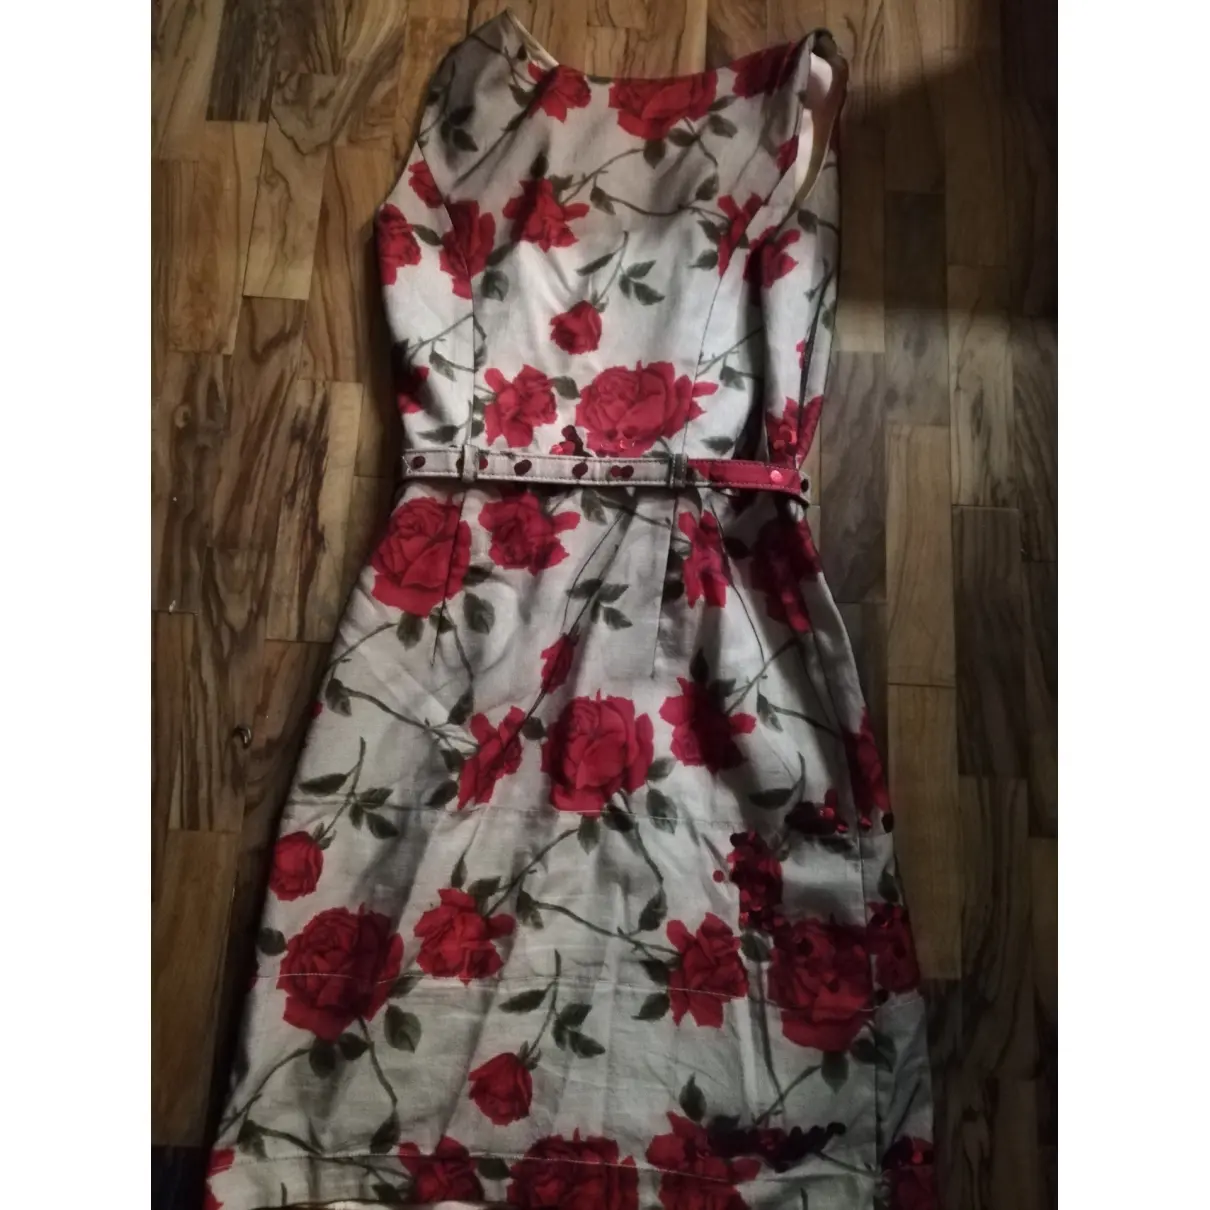 Moschino Cheap And Chic Mid-length dress for sale